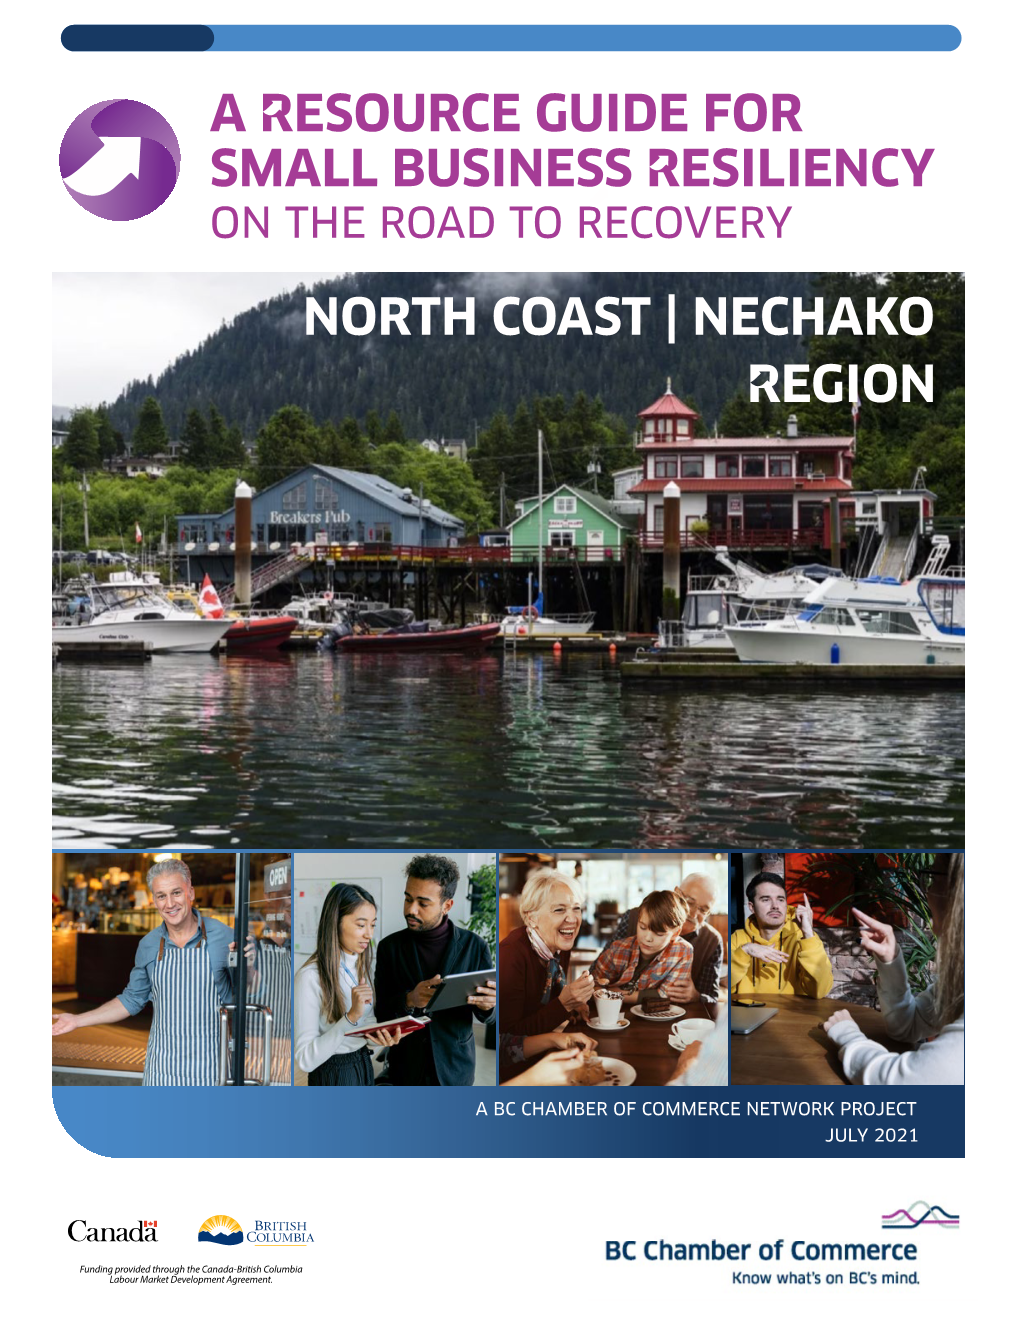 NORTH COAST | NECHAKO RESOURCE GUIDE for SMALL BUSINESS RESILIENCY | Copyright © 2021 – BC Chamber of Commerce RENEWAL 01 |